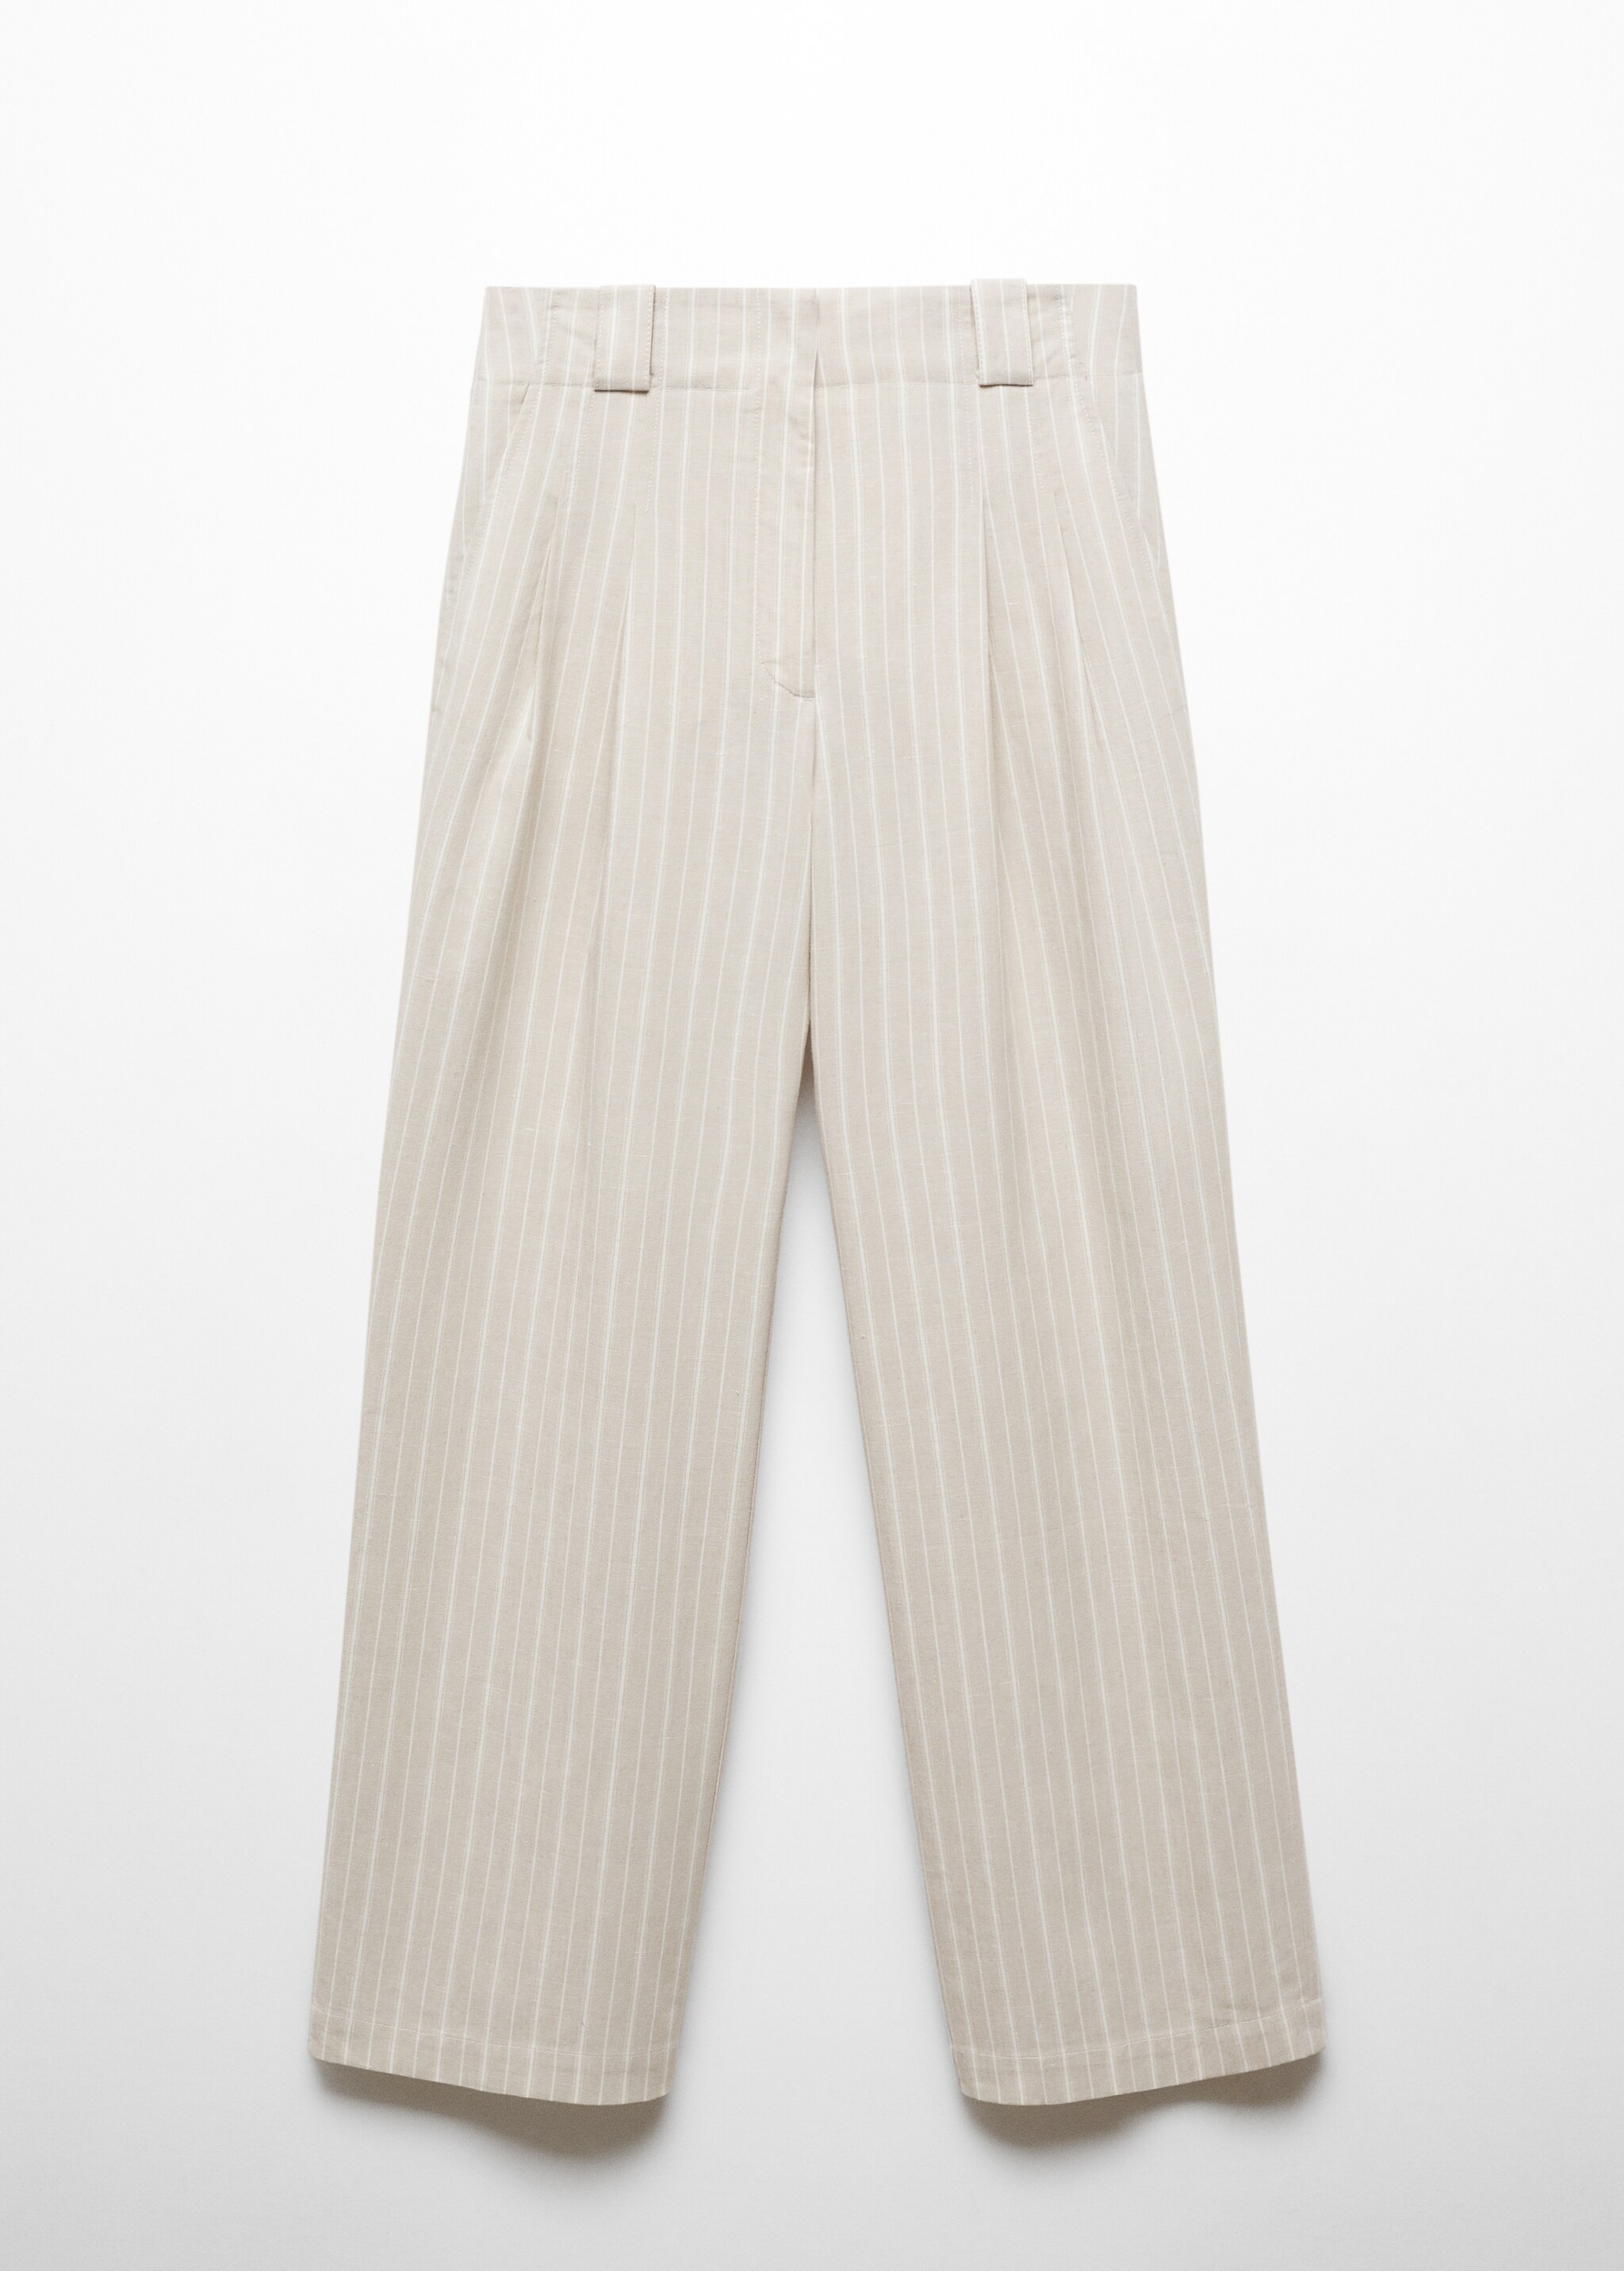 Straight striped trousers - Article without model